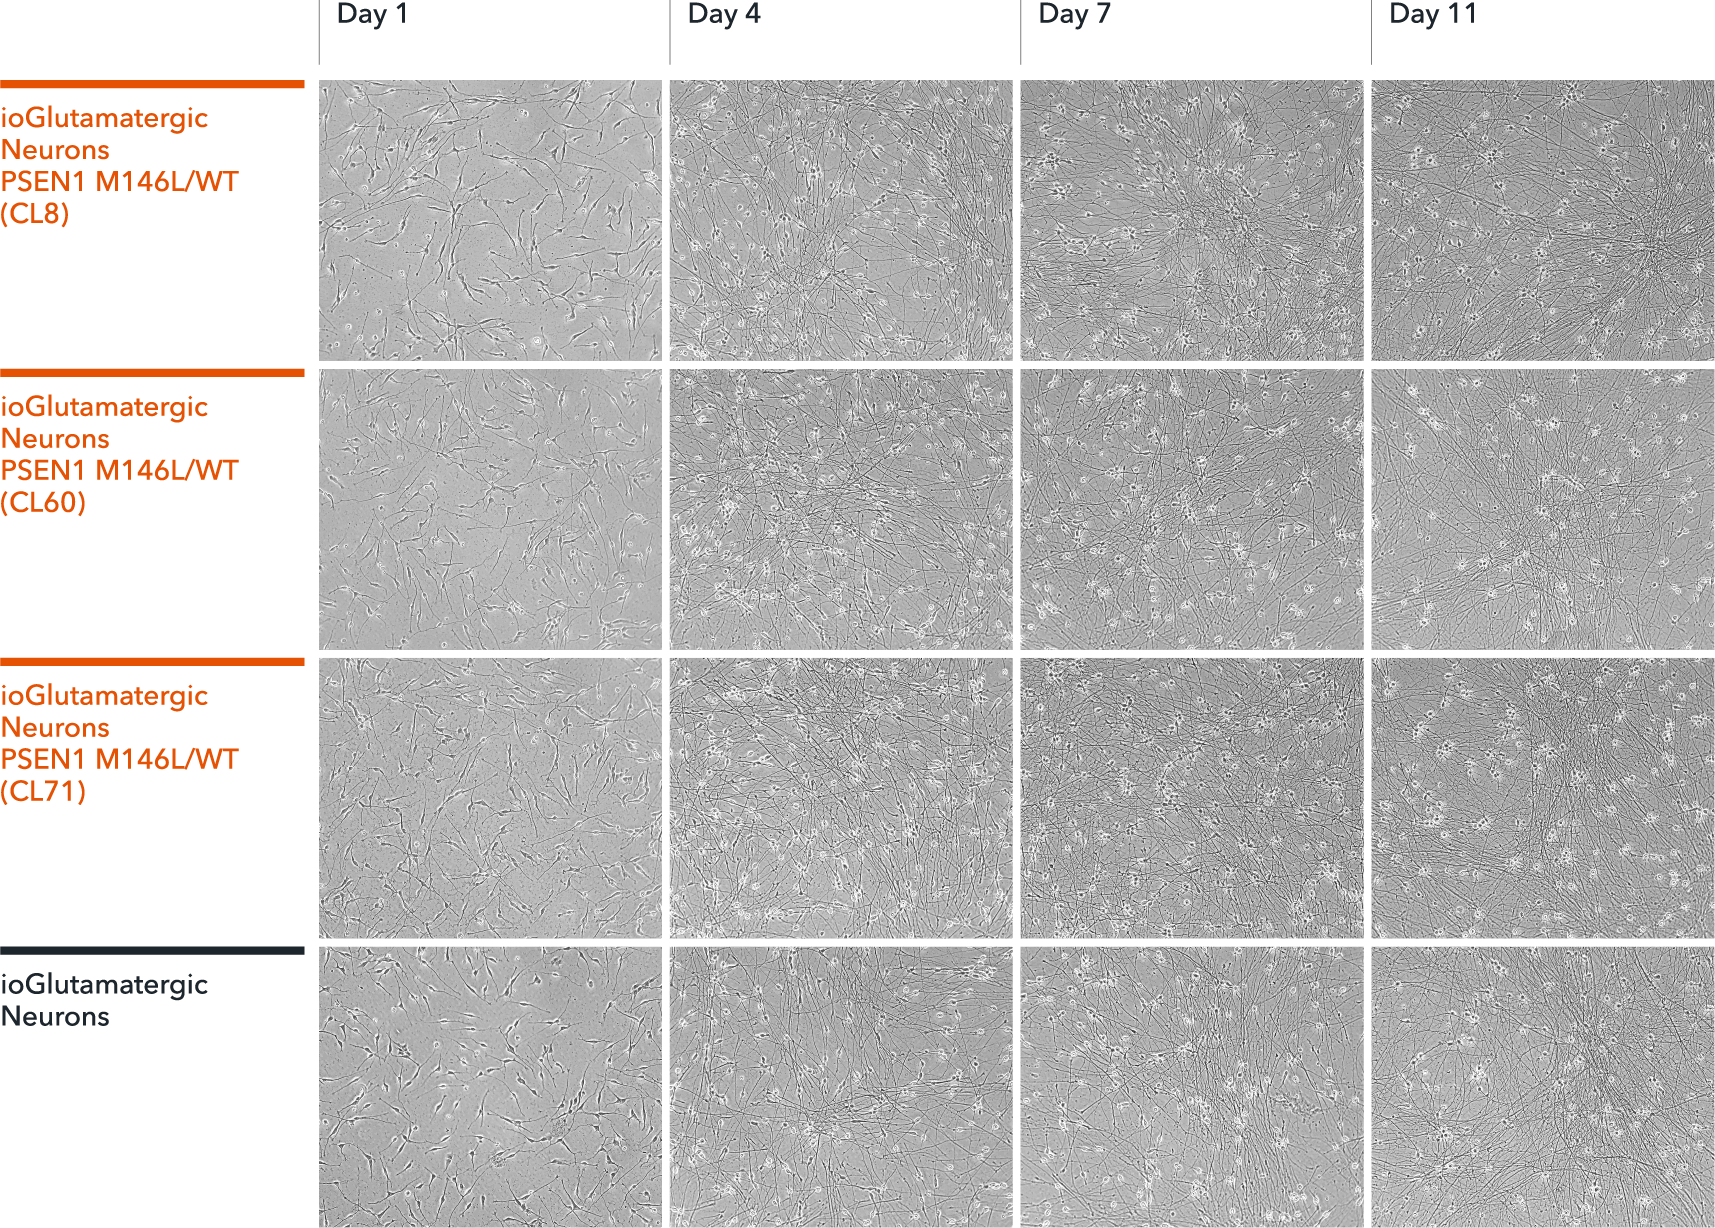 ioGlutamatergic Neurons PSEN1 M146L/WT morphology from day 1 to 11 post-thaw.